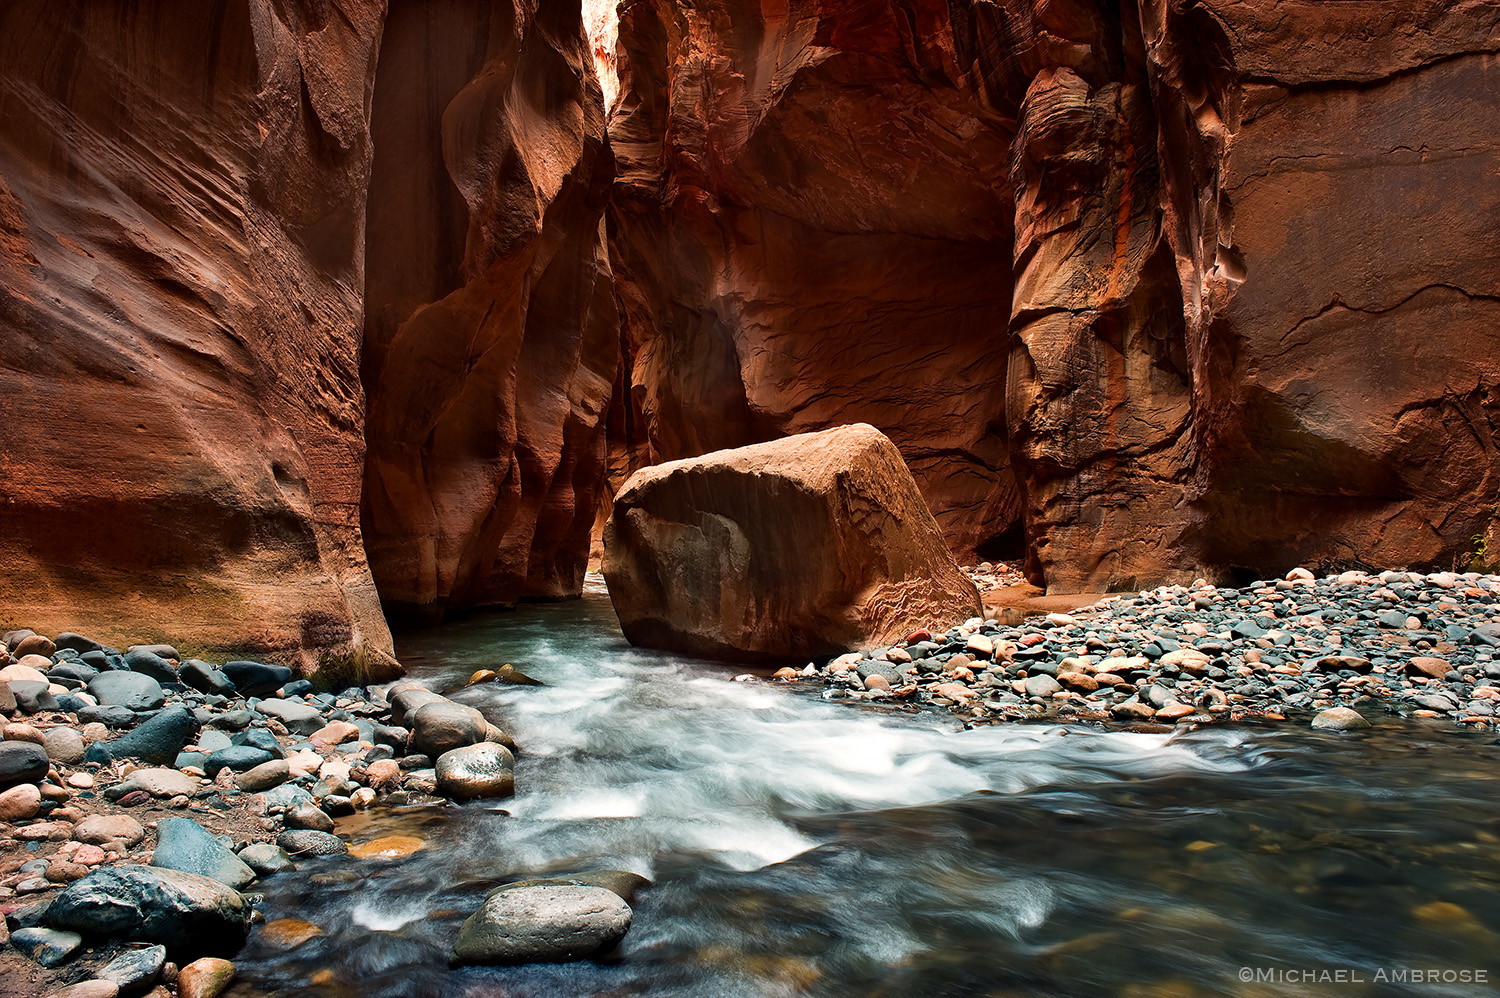 A river runs through a deep slot canyon in the narrows section of Zion National Park.